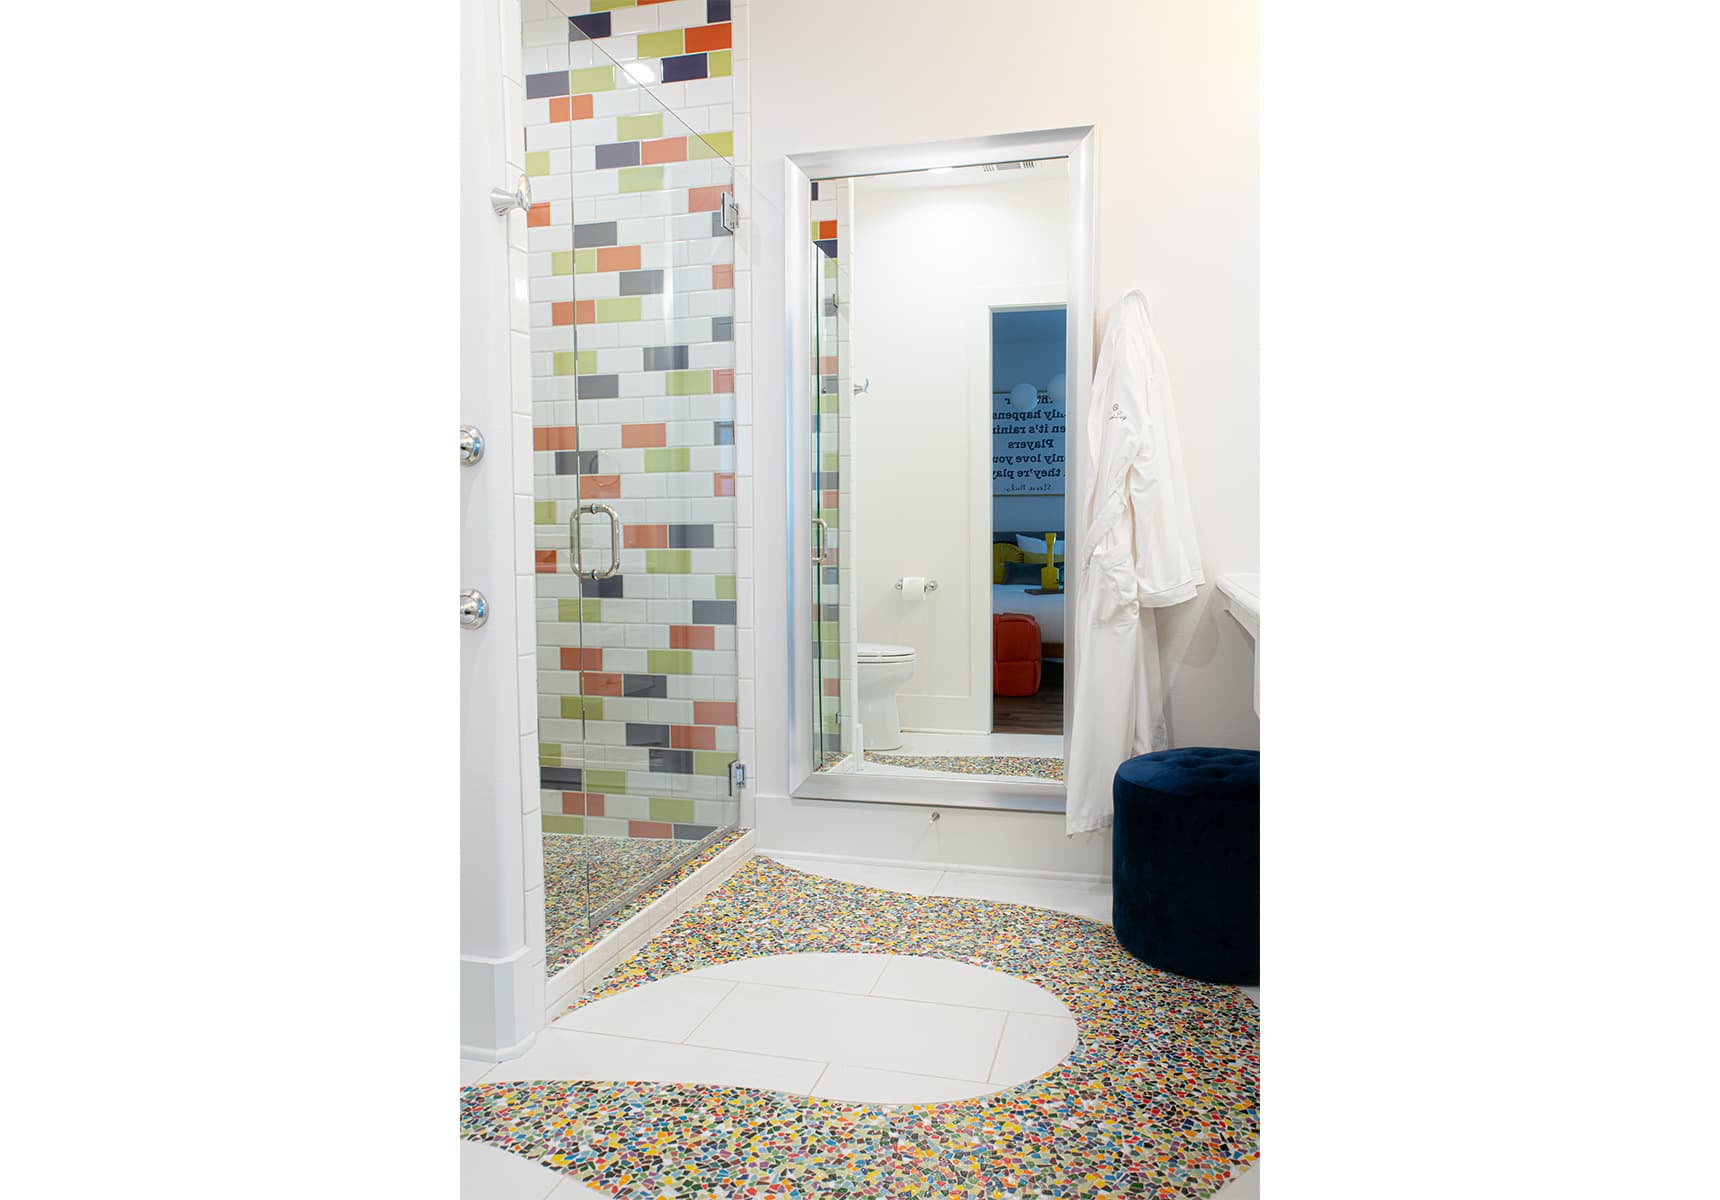 Bathroom with colorful tile inlay and a walk-in shower